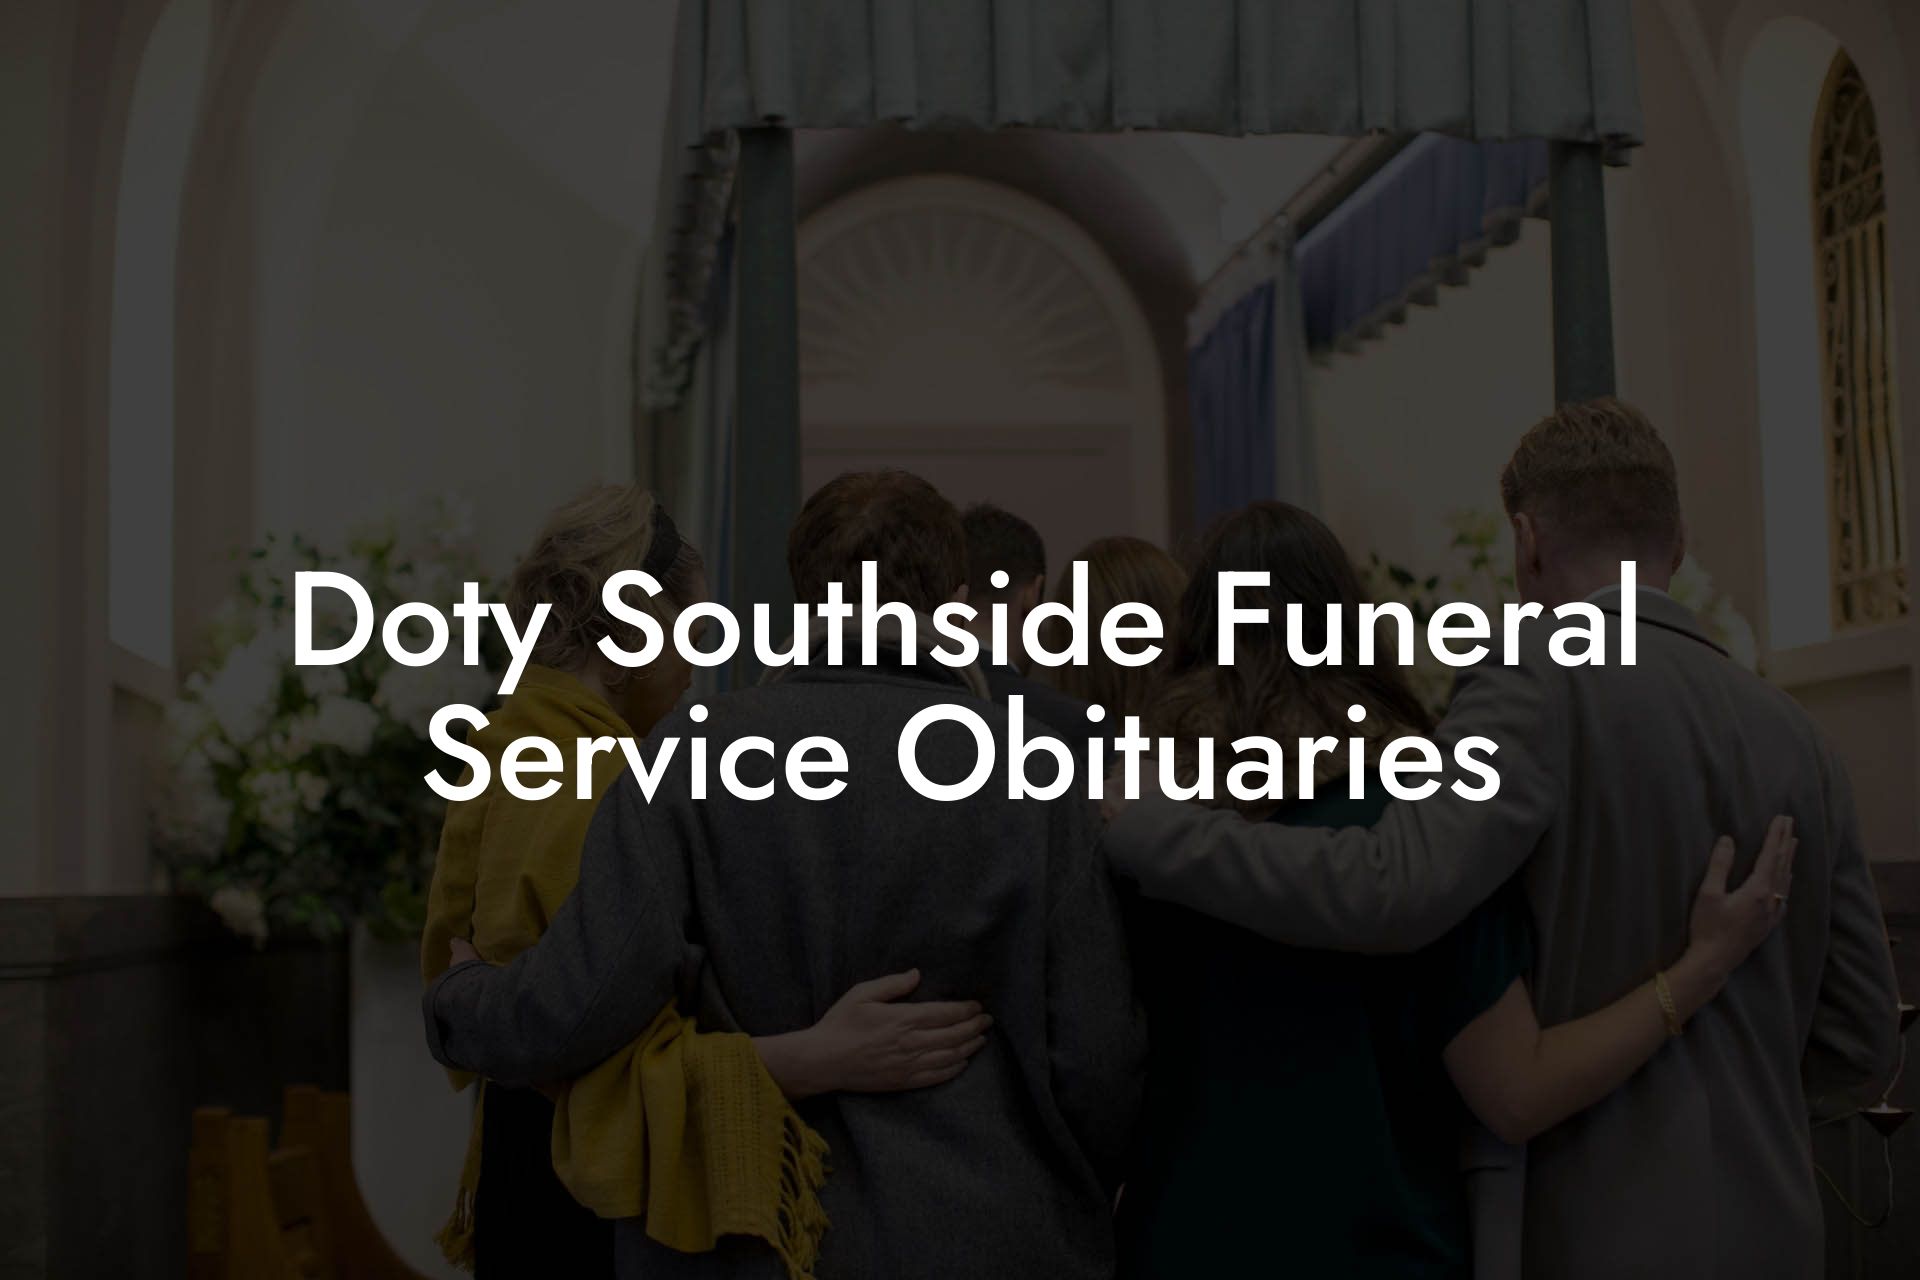 Doty Southside Funeral Service Obituaries